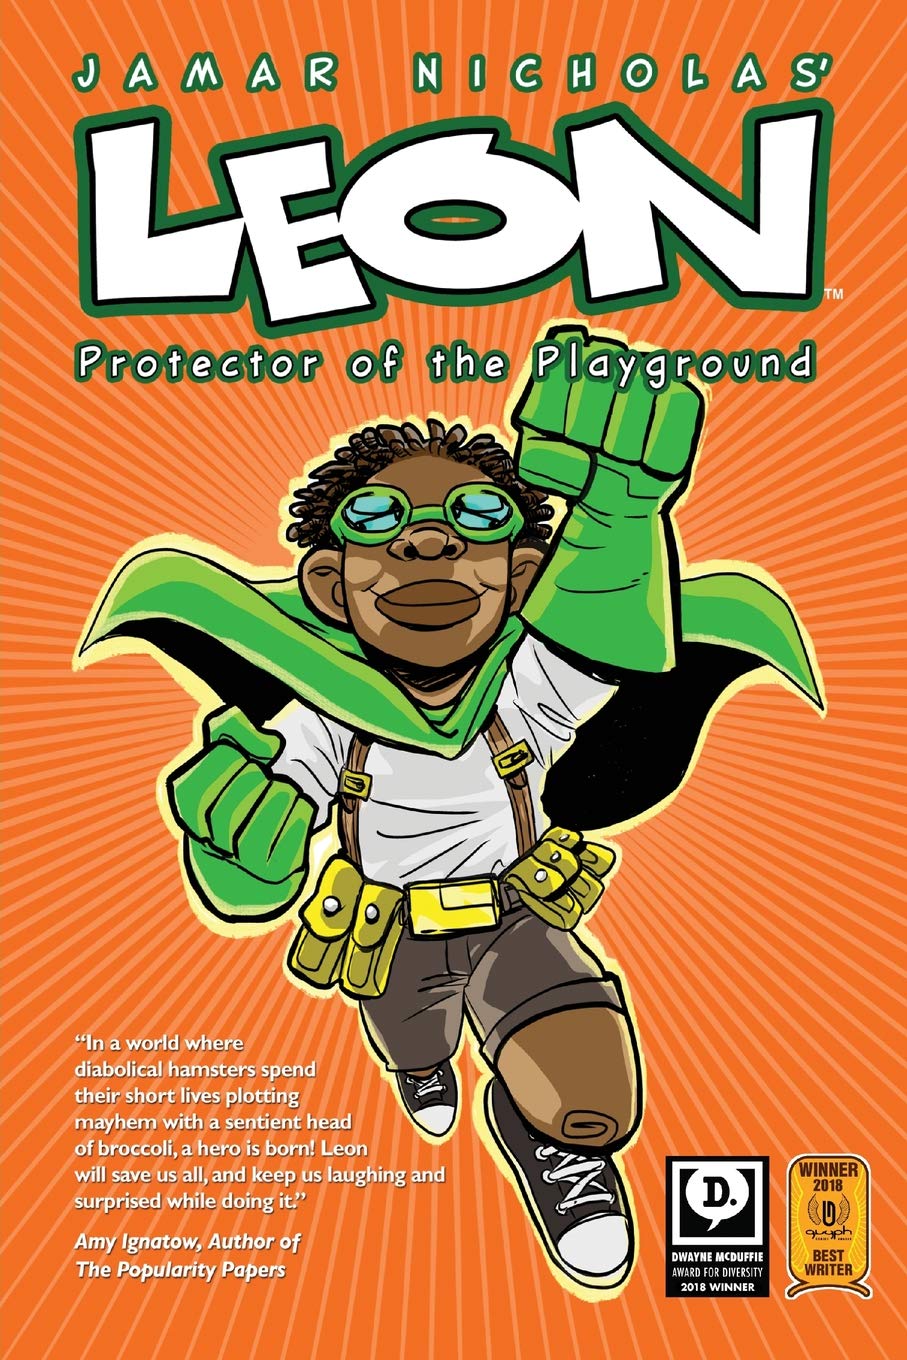 Cover to Jamar Nicholas' Leon Protector of the Playground comic